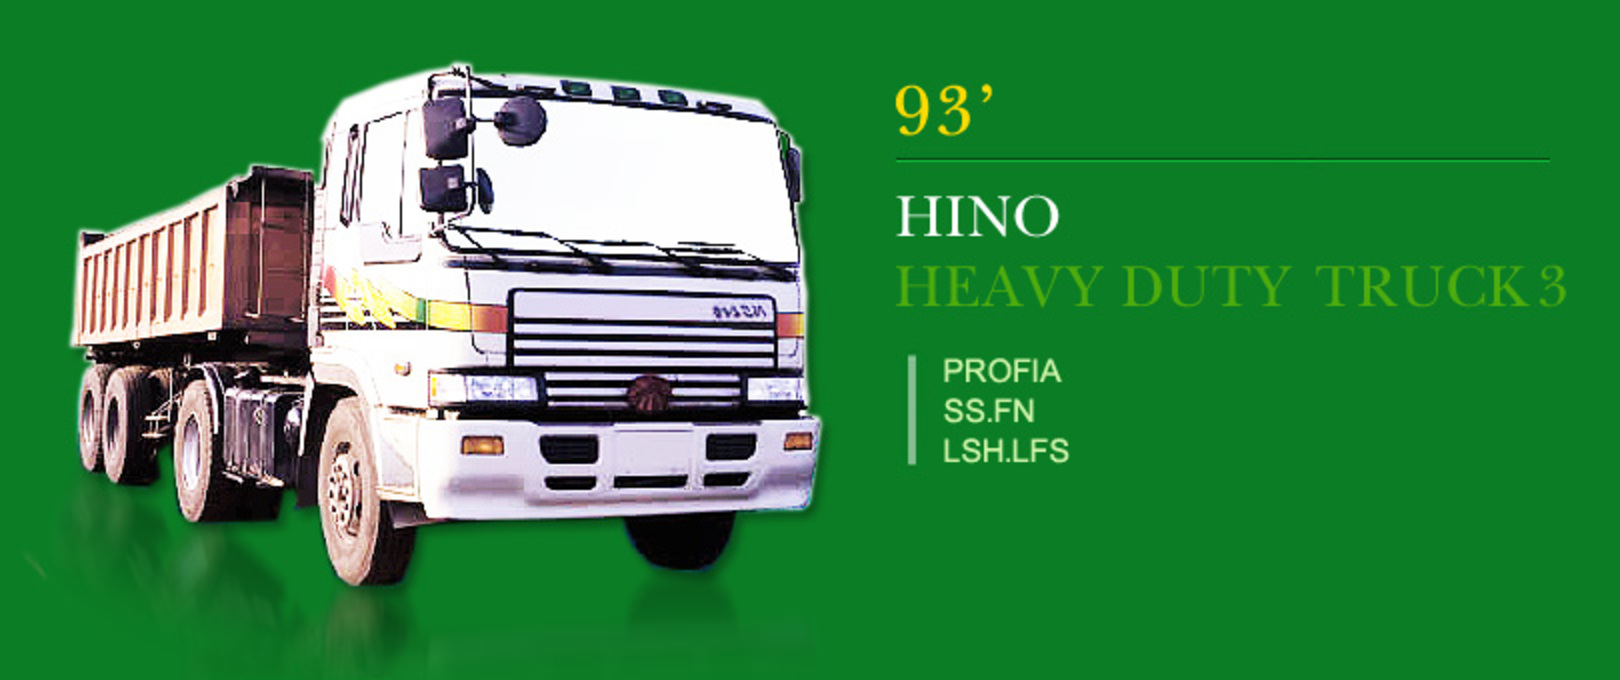 Hino LSH - cars catalog, specs, features, photos, videos, review, parts,